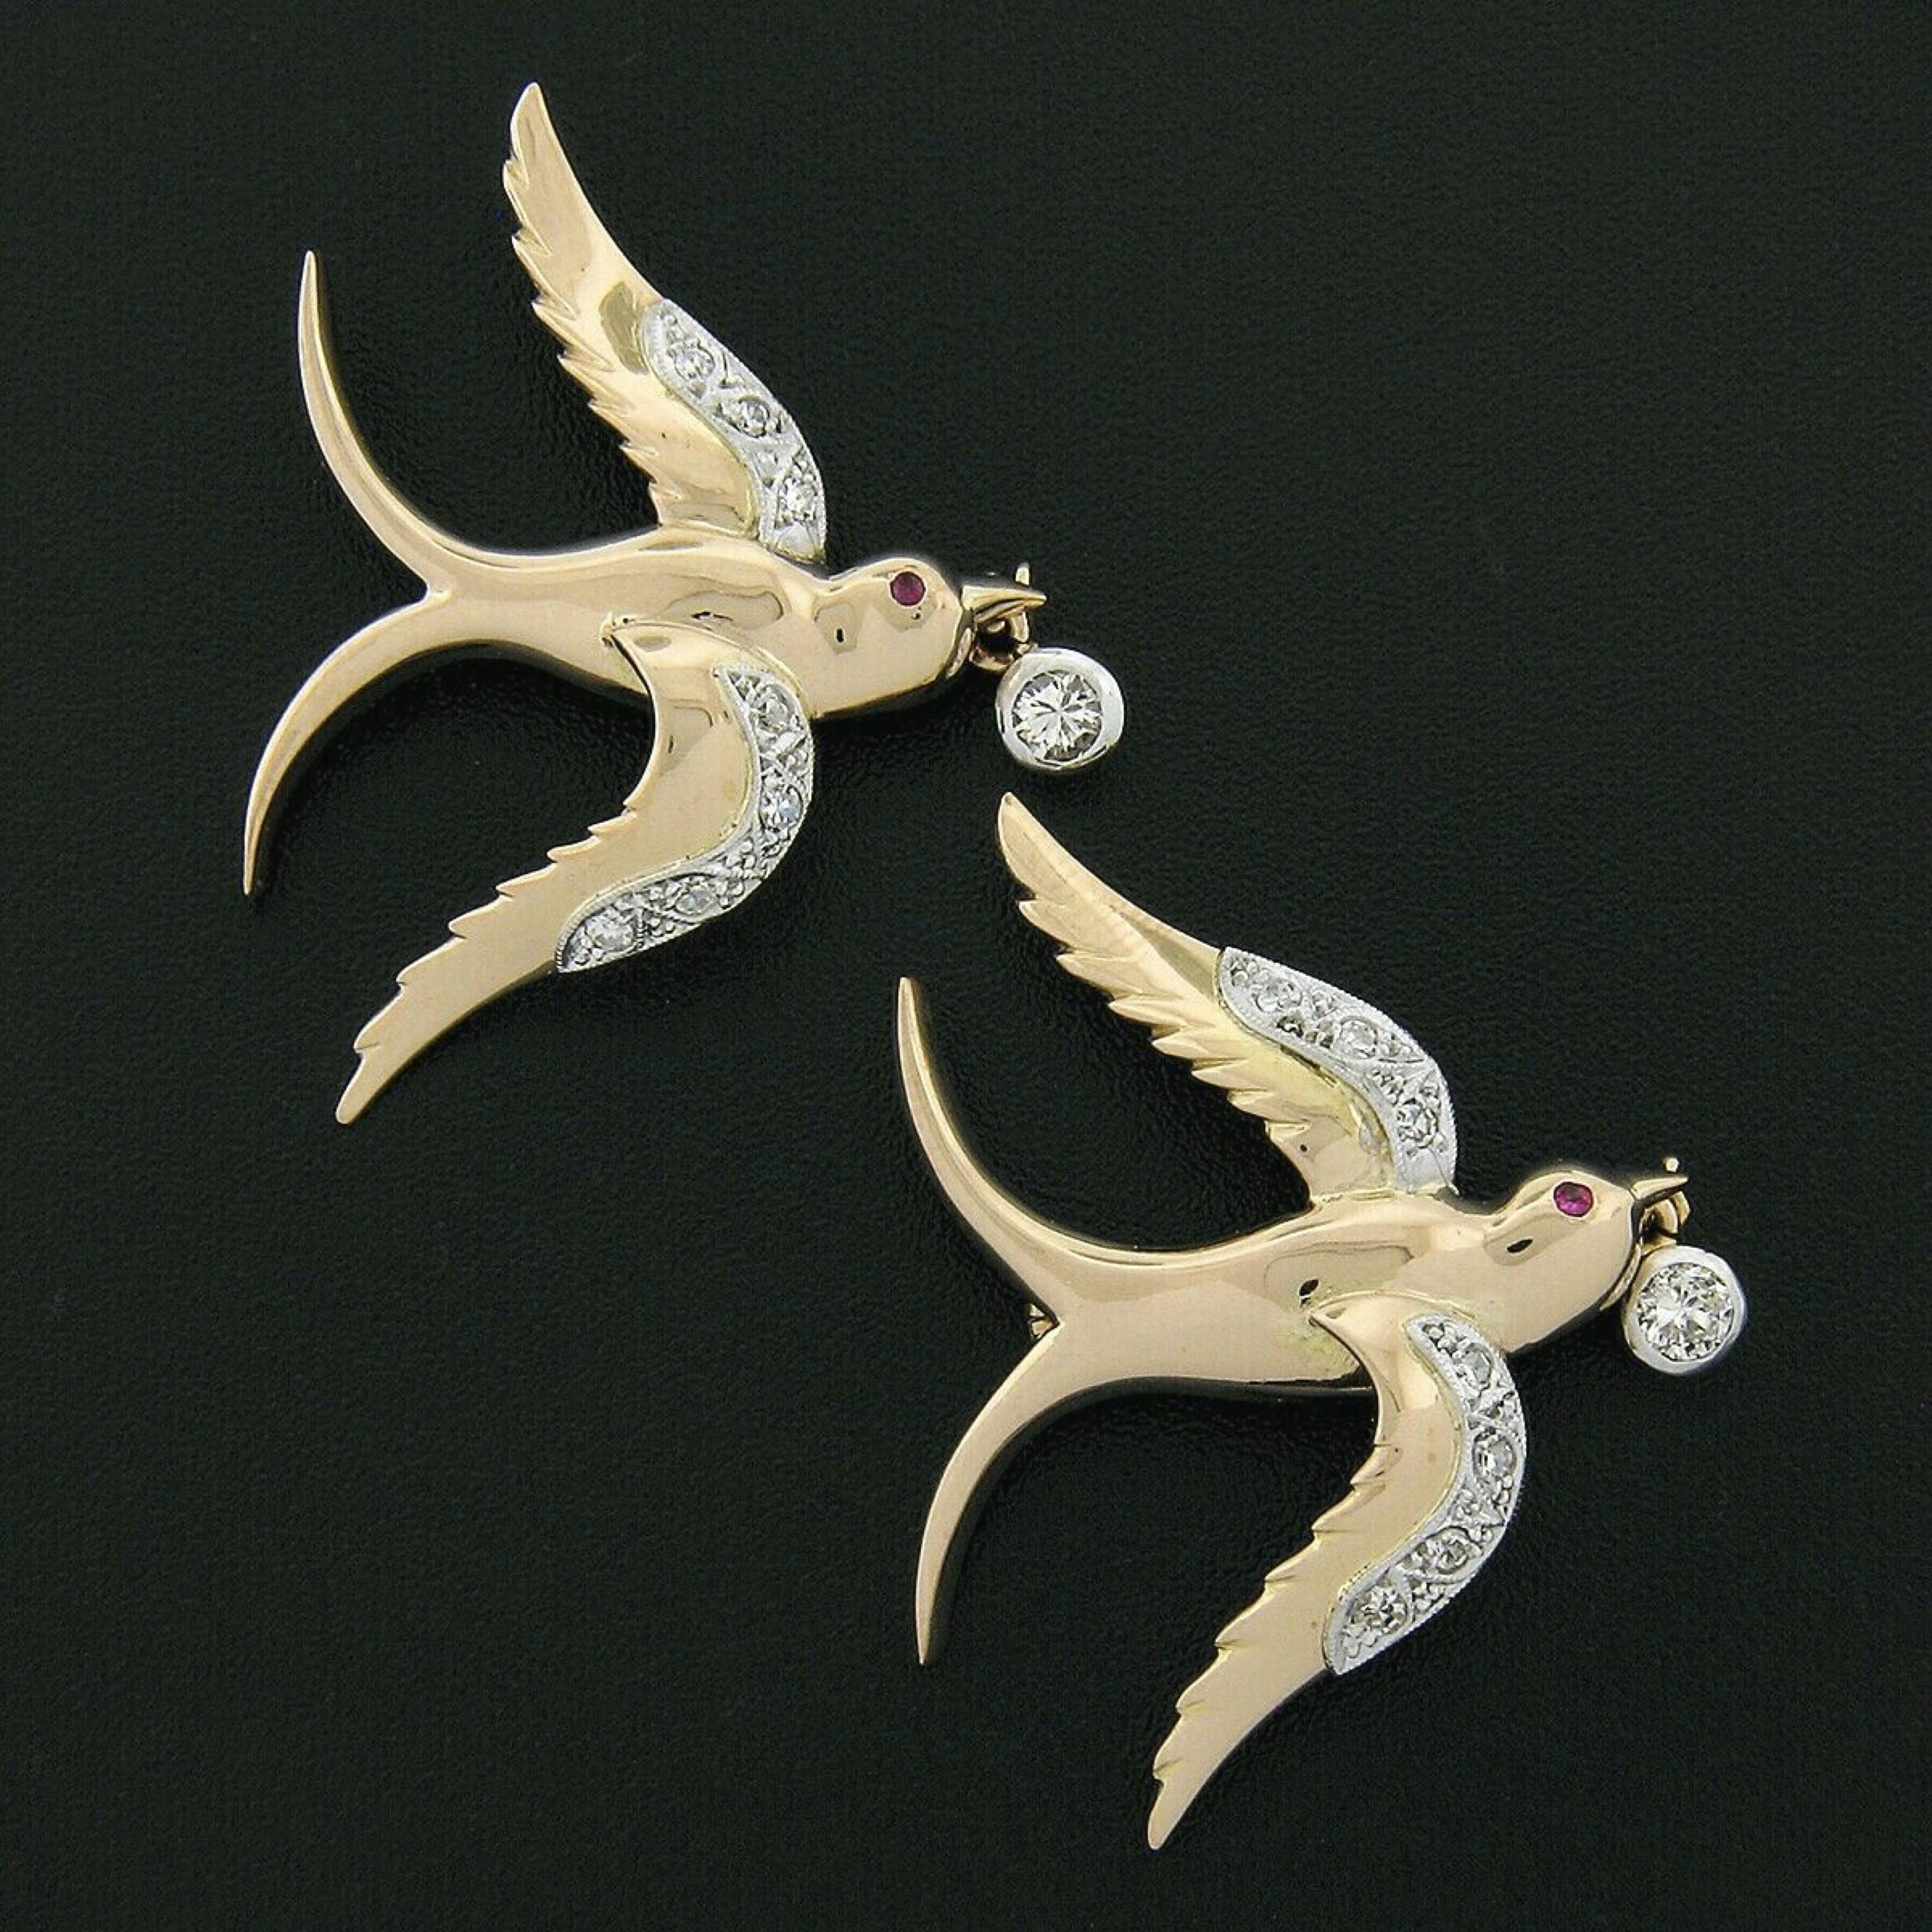 Here we have two vintage brooch pins that are crafted from solid 18k yellow gold and platinum with each featuring a beautiful matching swallow bird design. These well crafted brooches have a nice polished finish throughout and are adorned with very